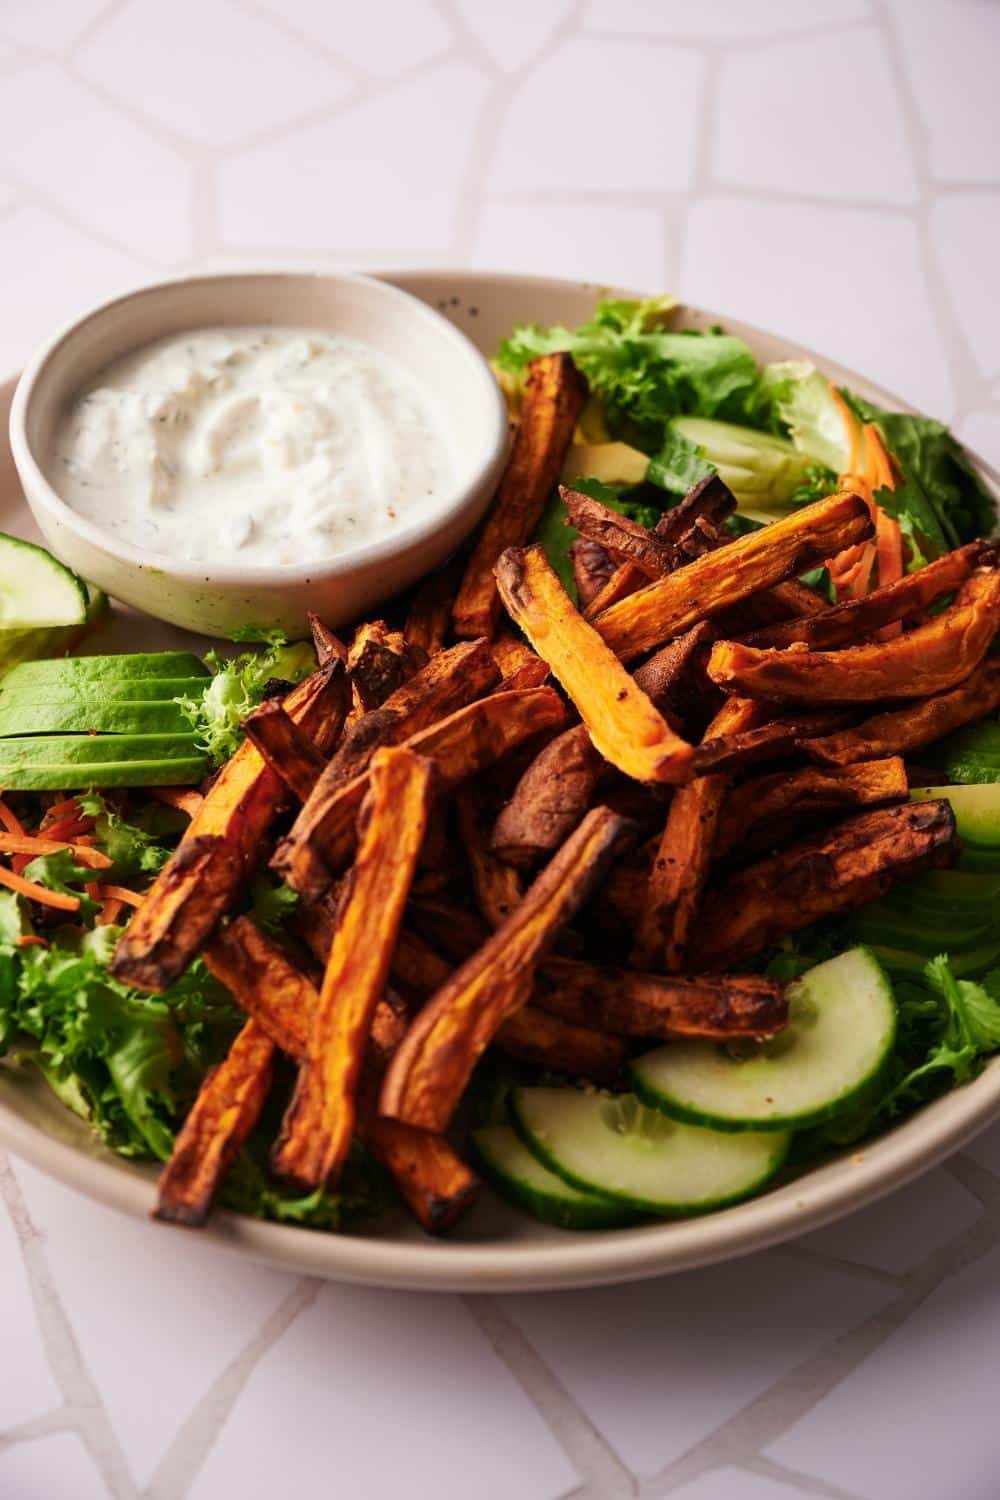 Air fried sweet potato fries on a beige plate. The fries are resting on top of a salad of lettuce and sliced cucumbers next to a small bowl of creamy dipping sauce.